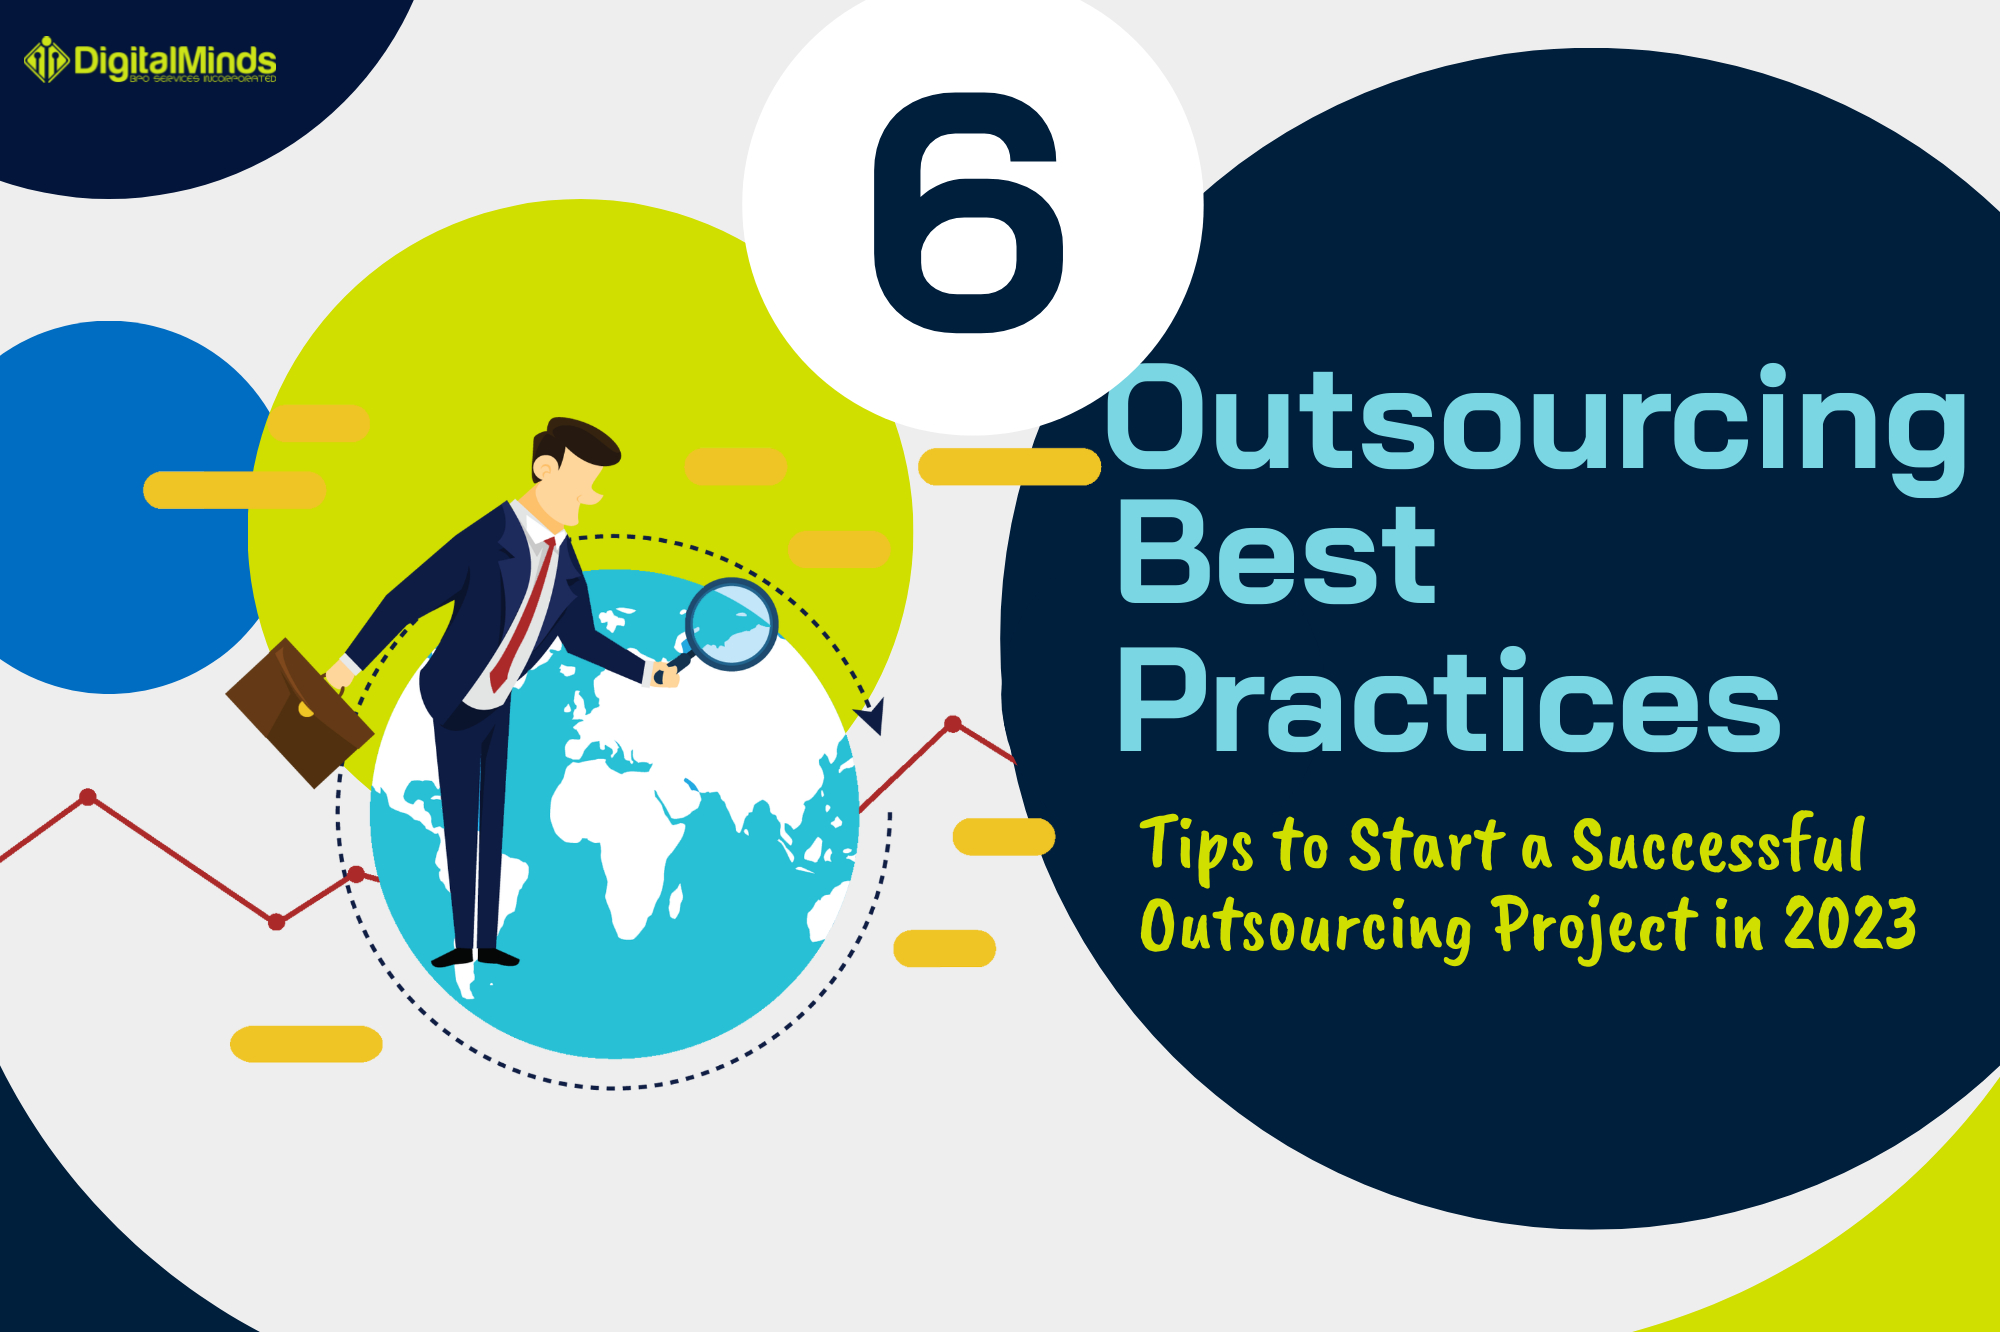 6 outsourcing best practices to start a successful outsourcing project